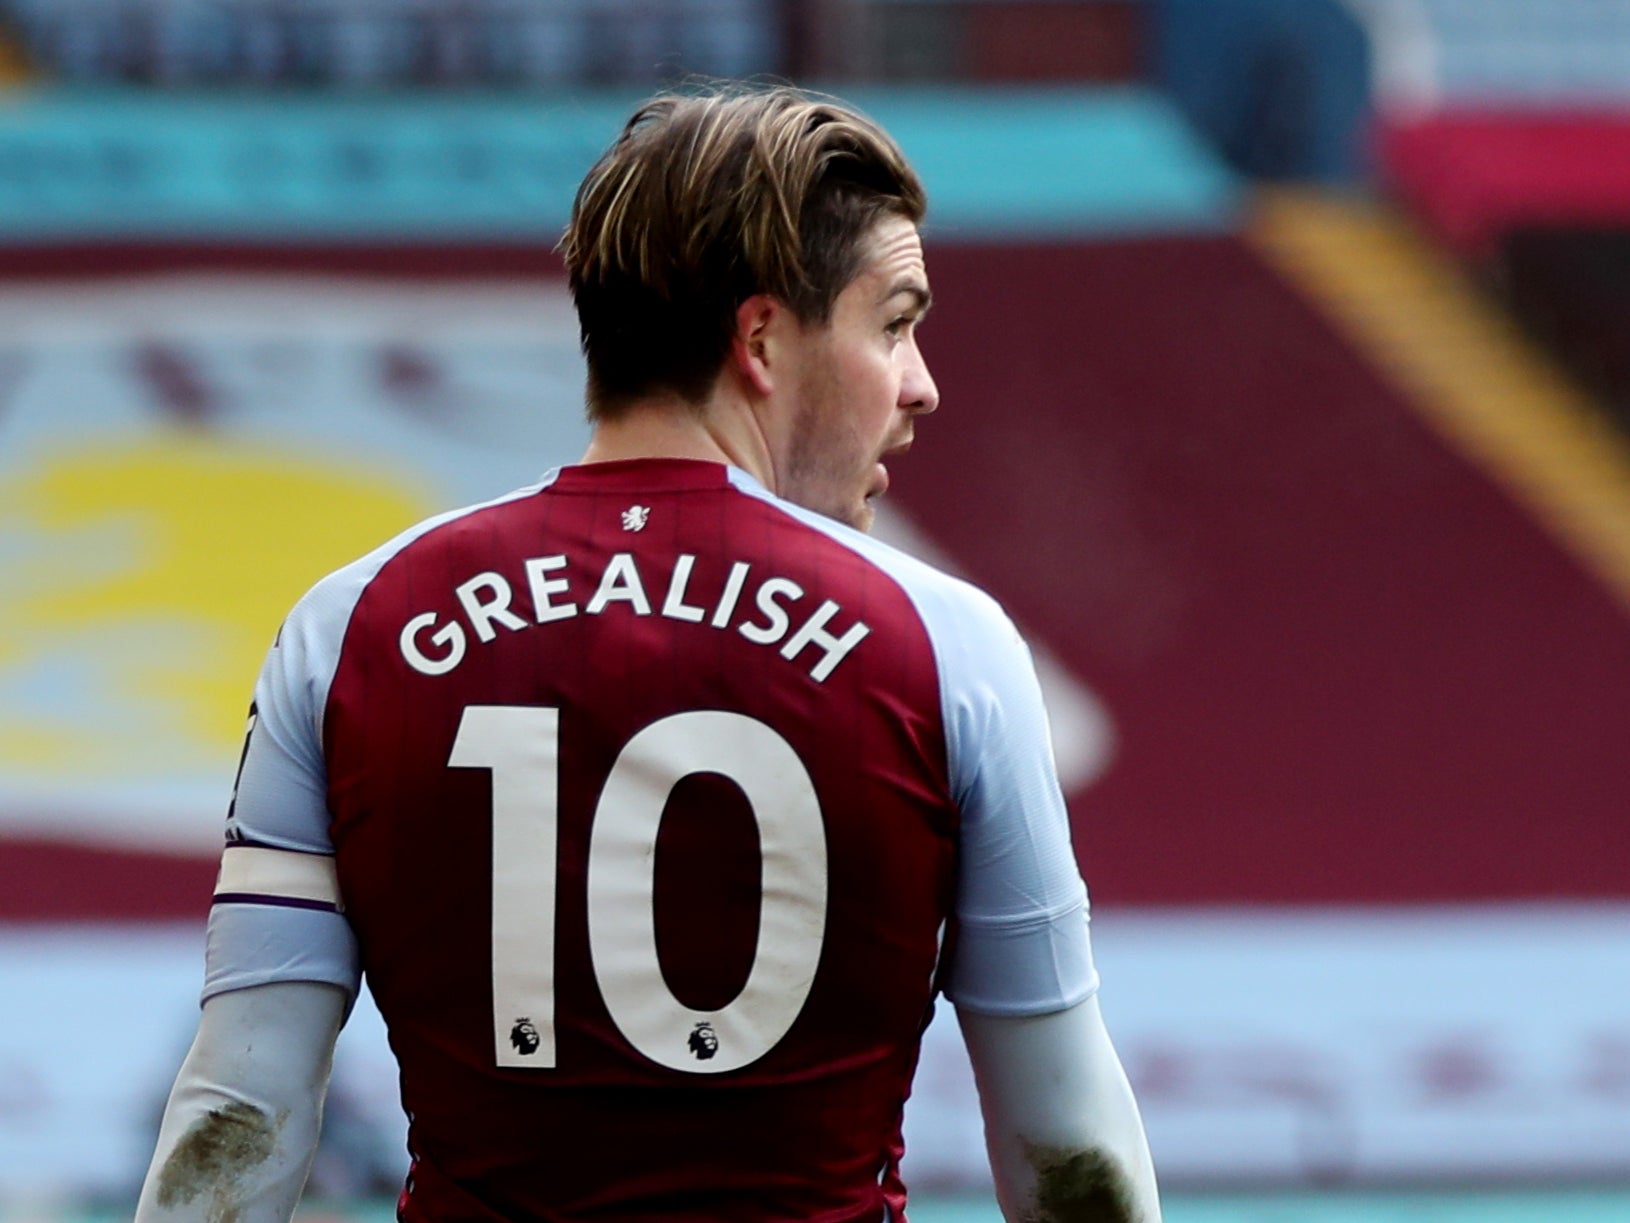 Jack Grealish has been in impressive form this season